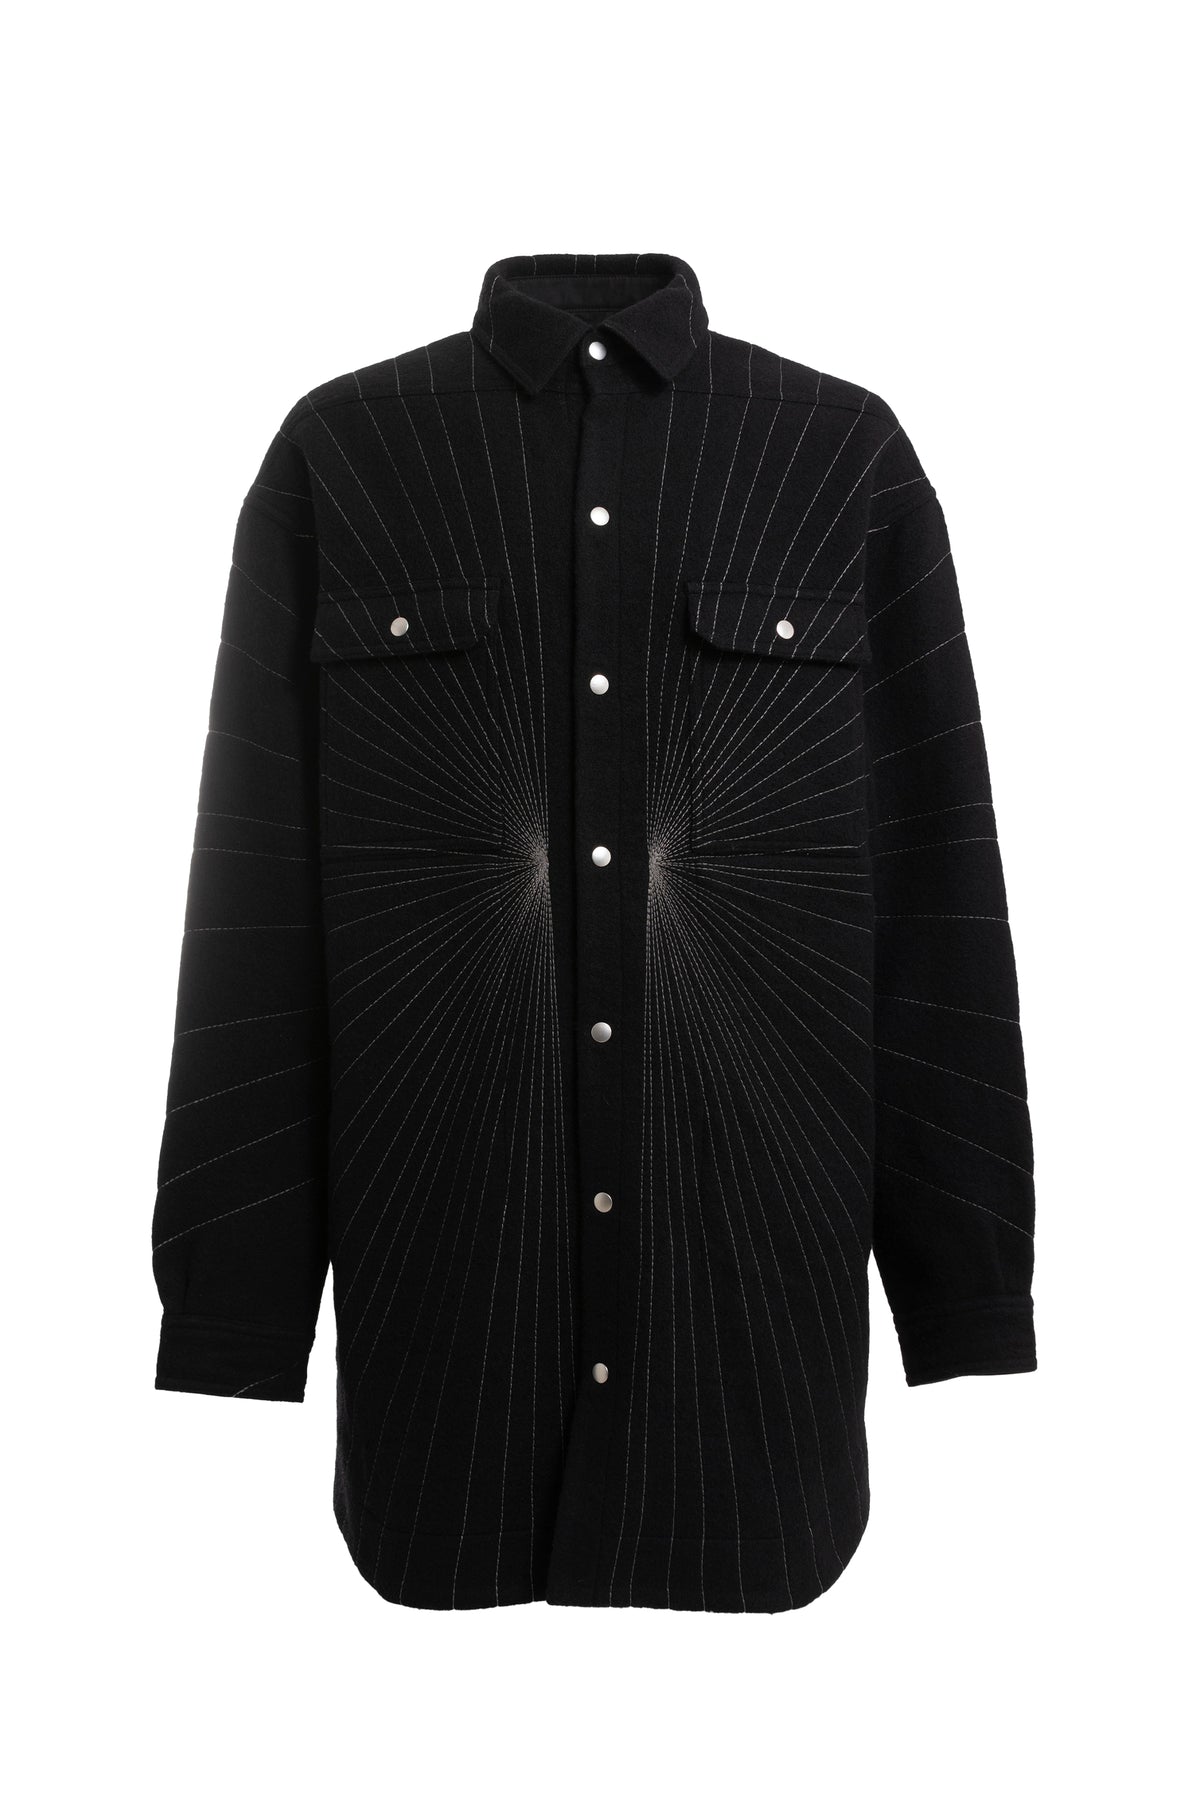 OVERSIZED OUTERSHIRT/ BLK